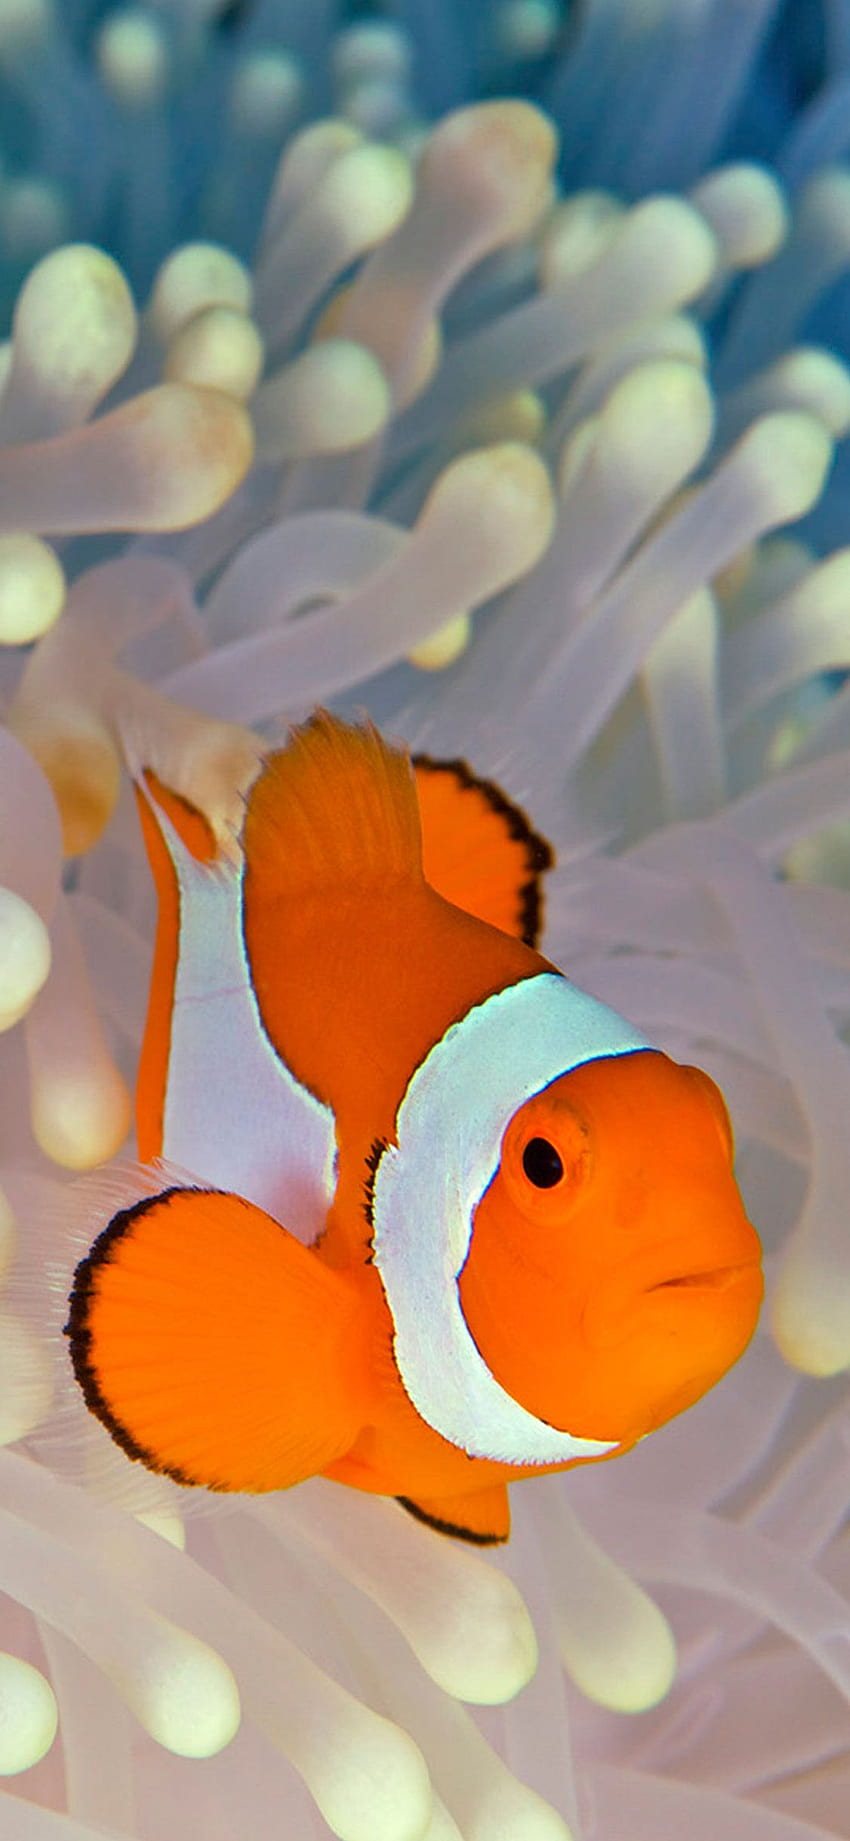 Wallpaper Colourful Fish Anemone Fish Clownfish  Best Free wallpapers